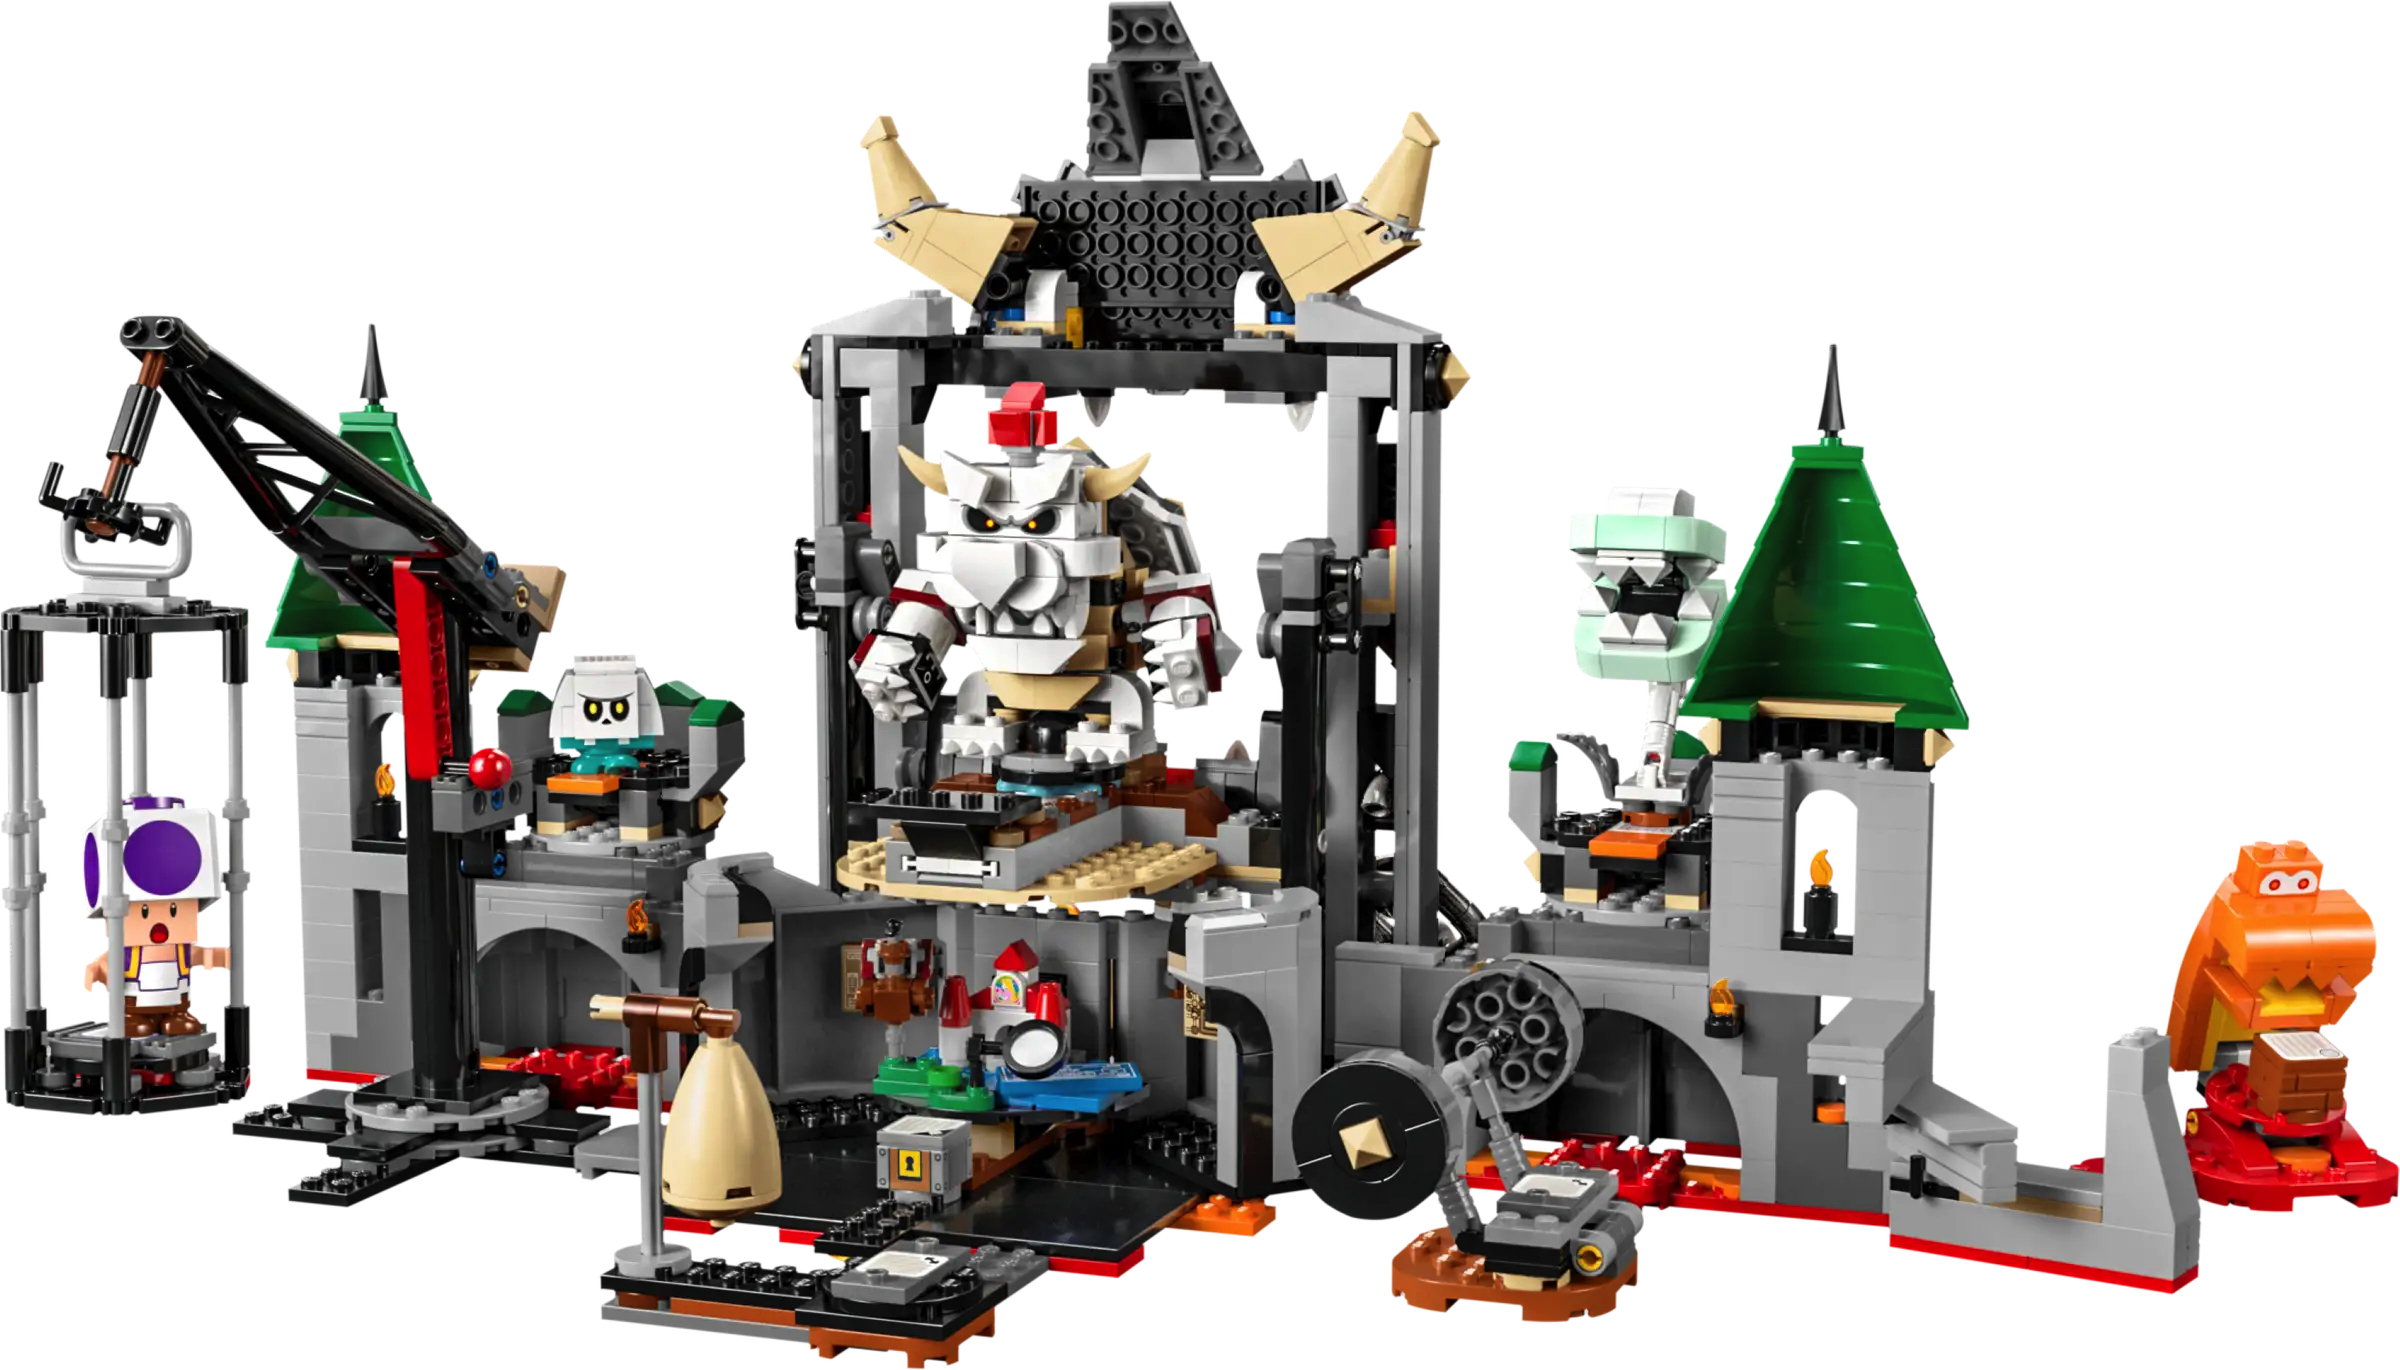 New Bowser’s Castle expansion set for LEGO Super Mario.  Can’t I get a real build instead?